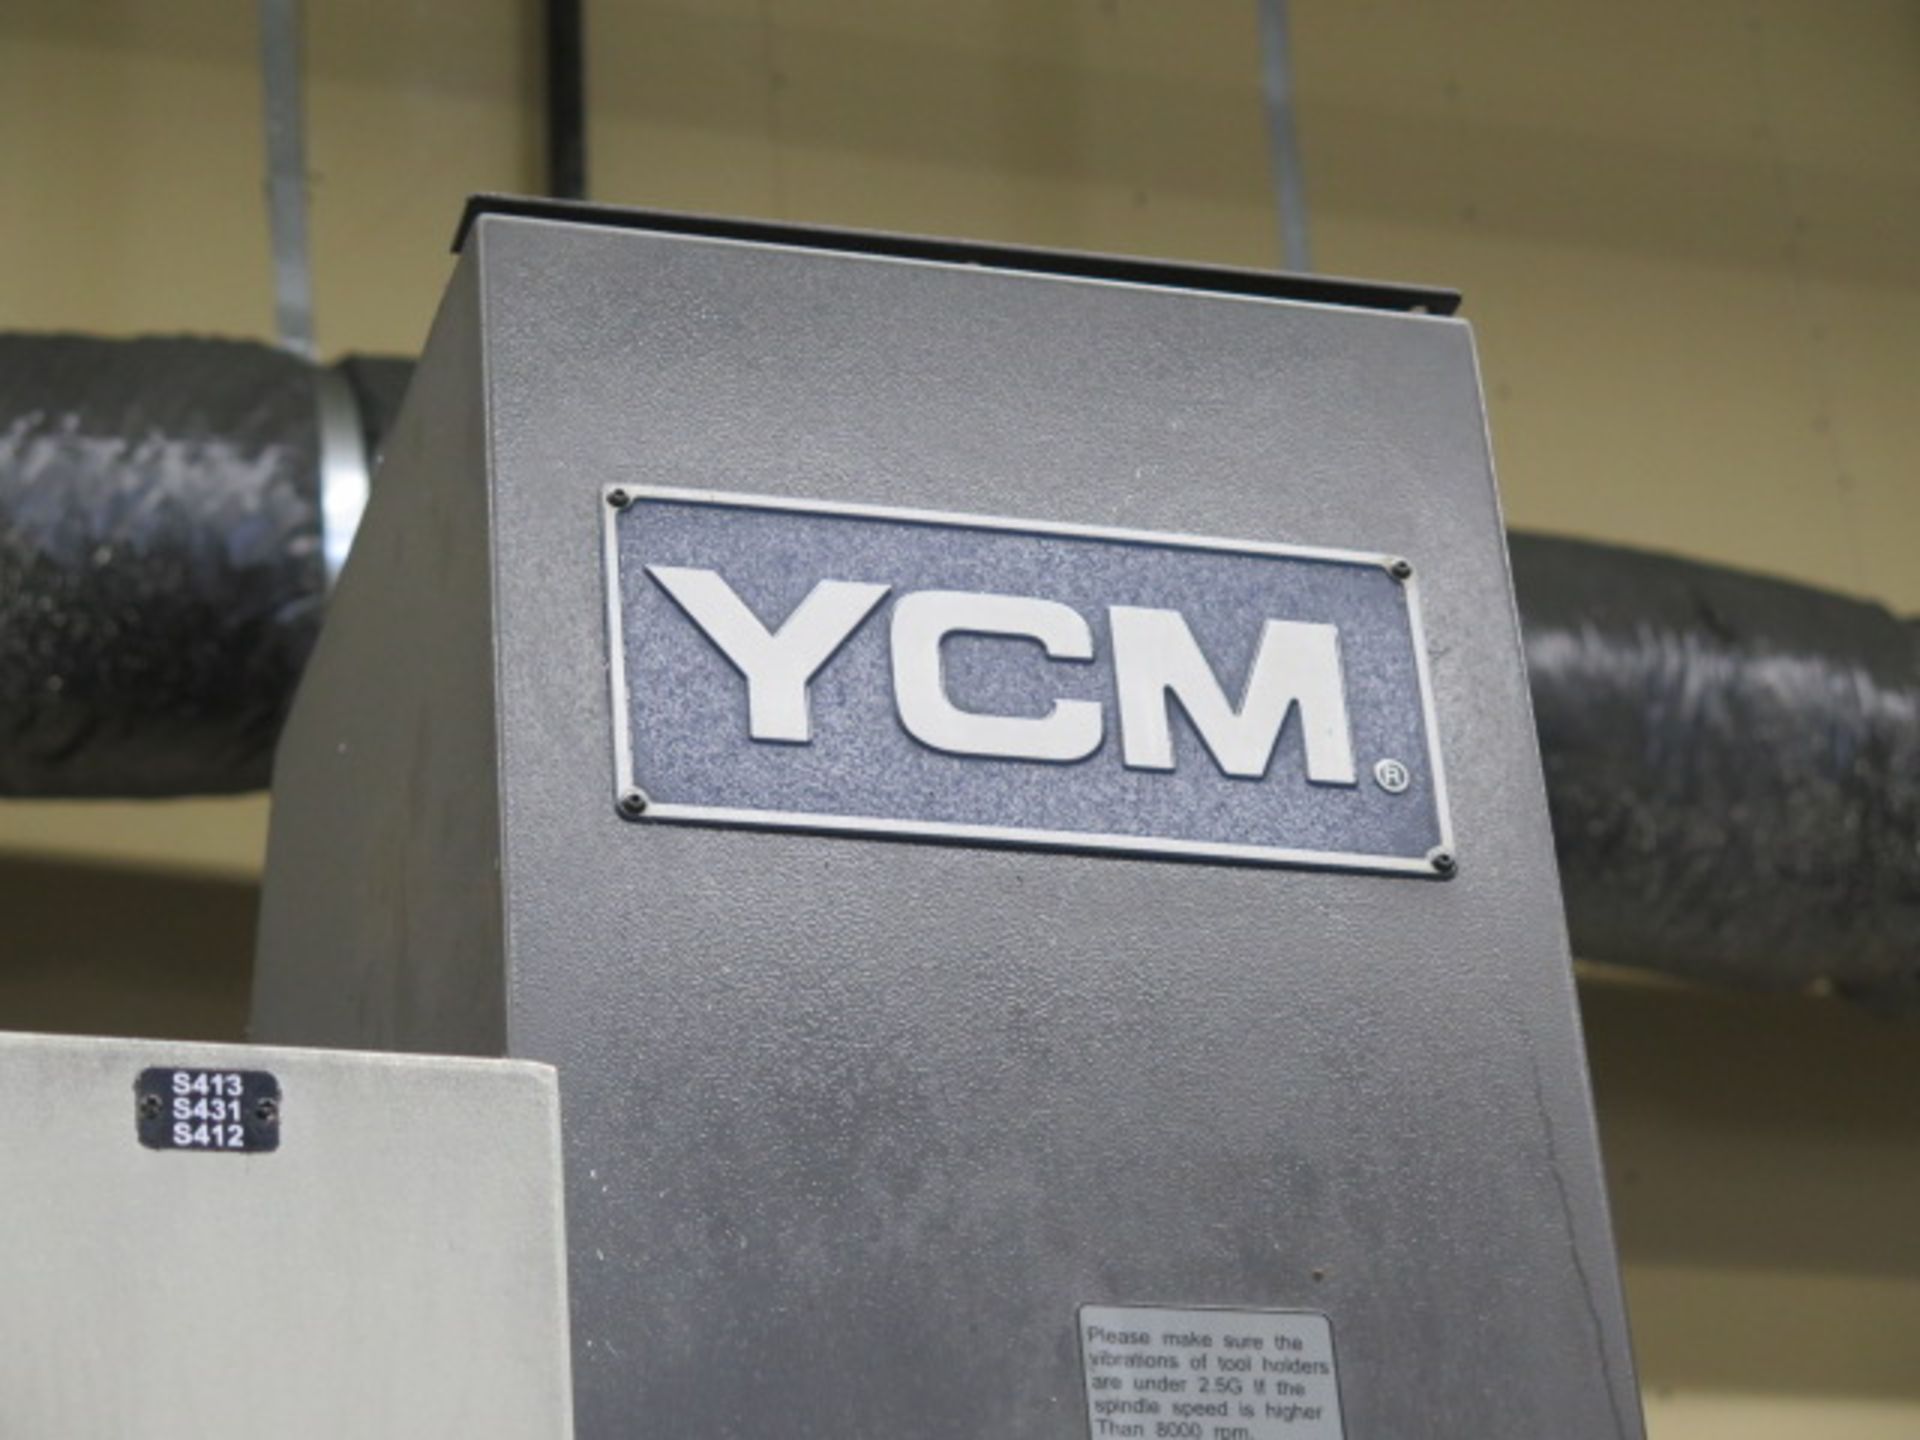 2006 YCM XV-1020A CNC VMC s/n 1129 w/ Fanuc MXP-200i Controls, Hand Wheel, SOLD AS IS - Image 3 of 20